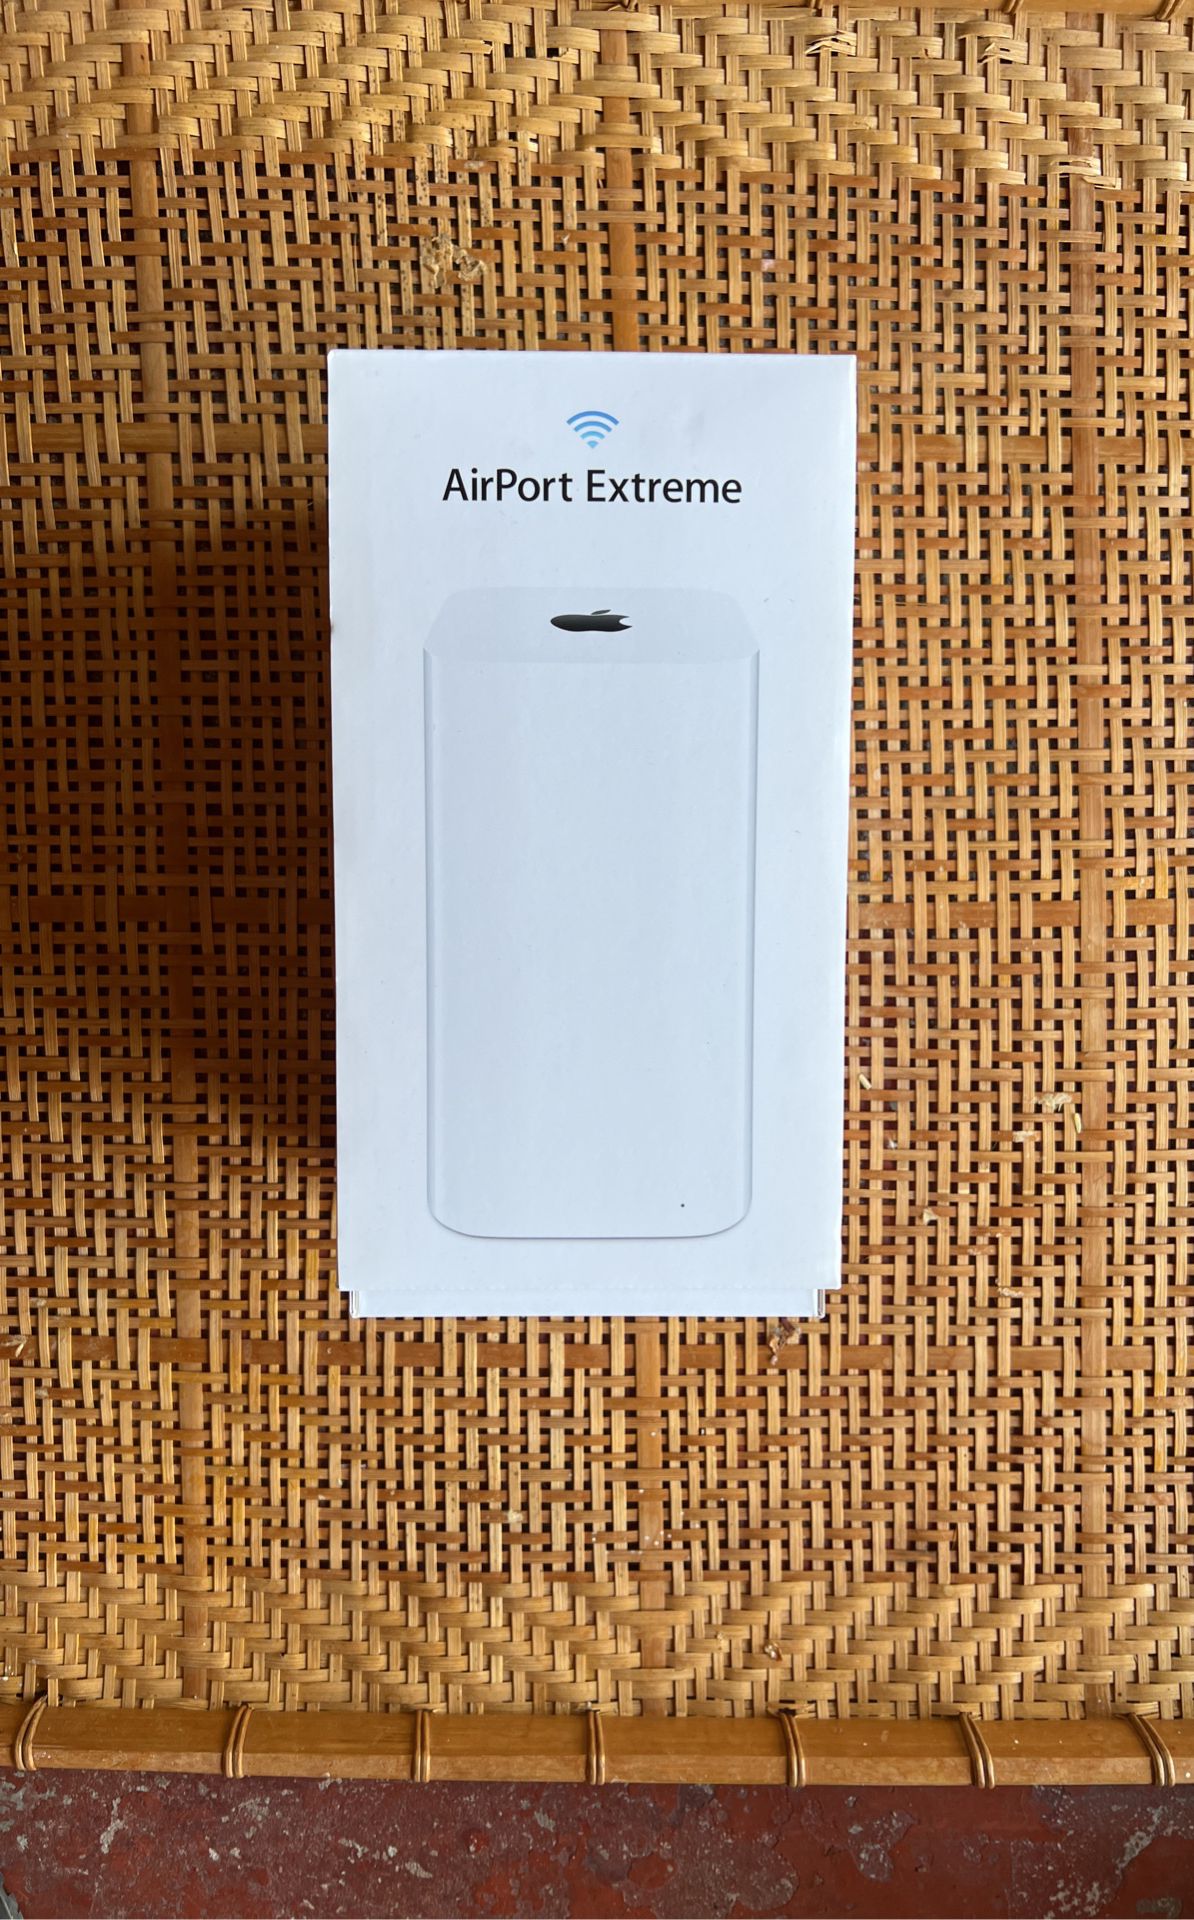 Apple AirPort Extreme Wi-Fi Modem